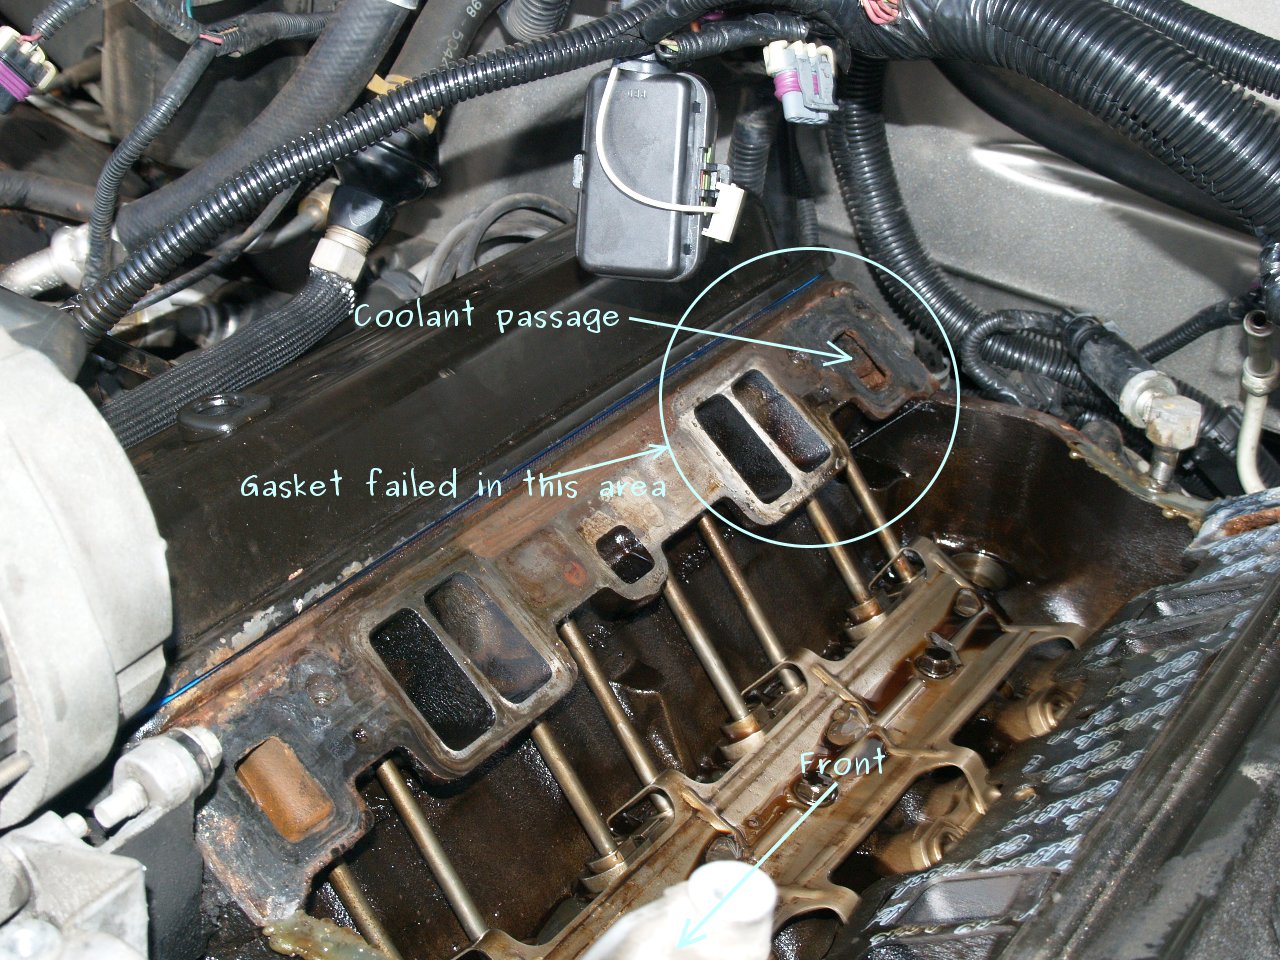 See P3405 in engine